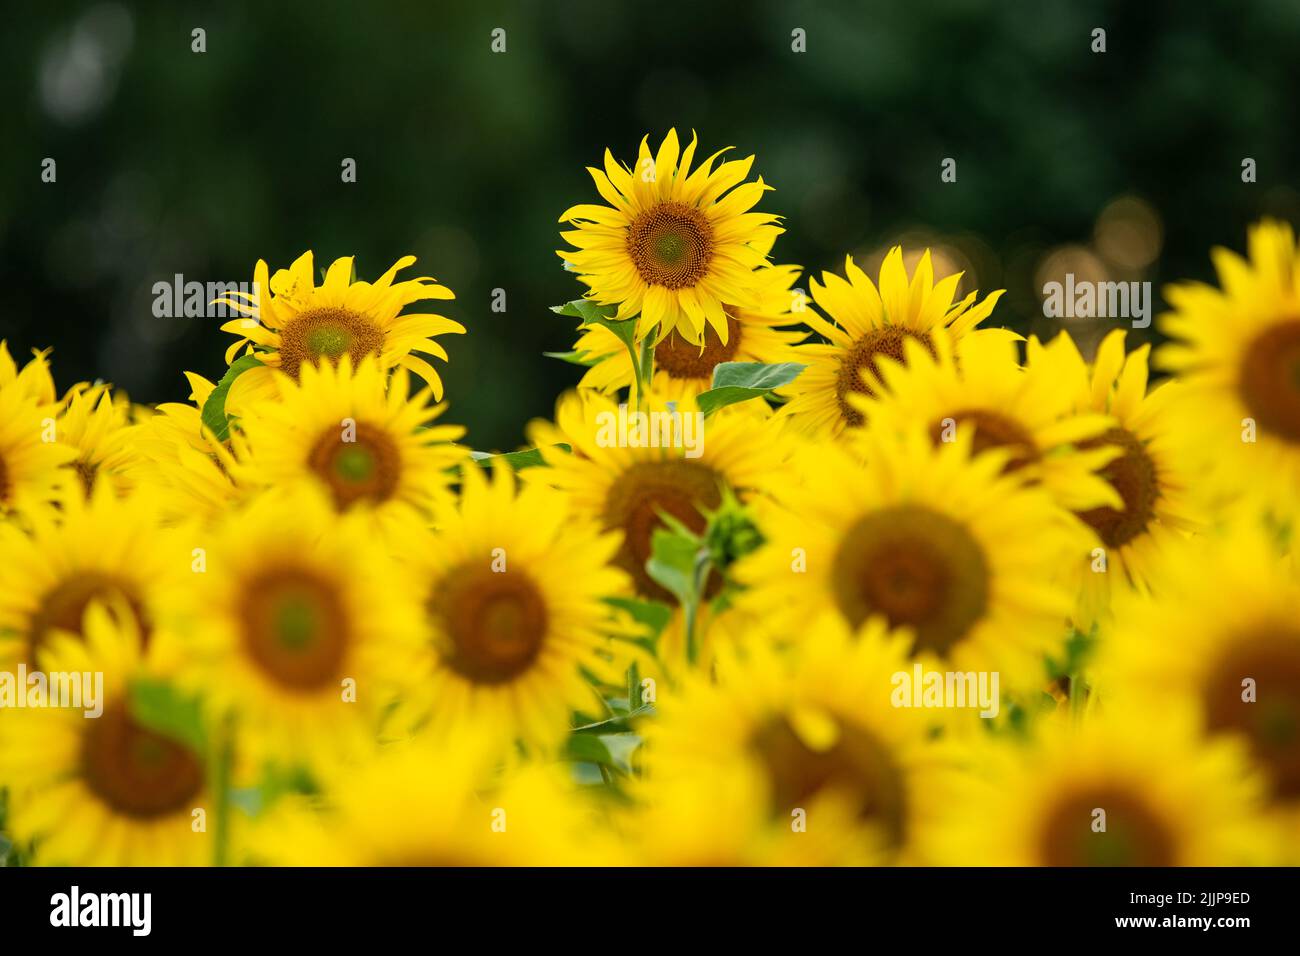 one-offe sunflower above many similar plants on the field Stock Photo